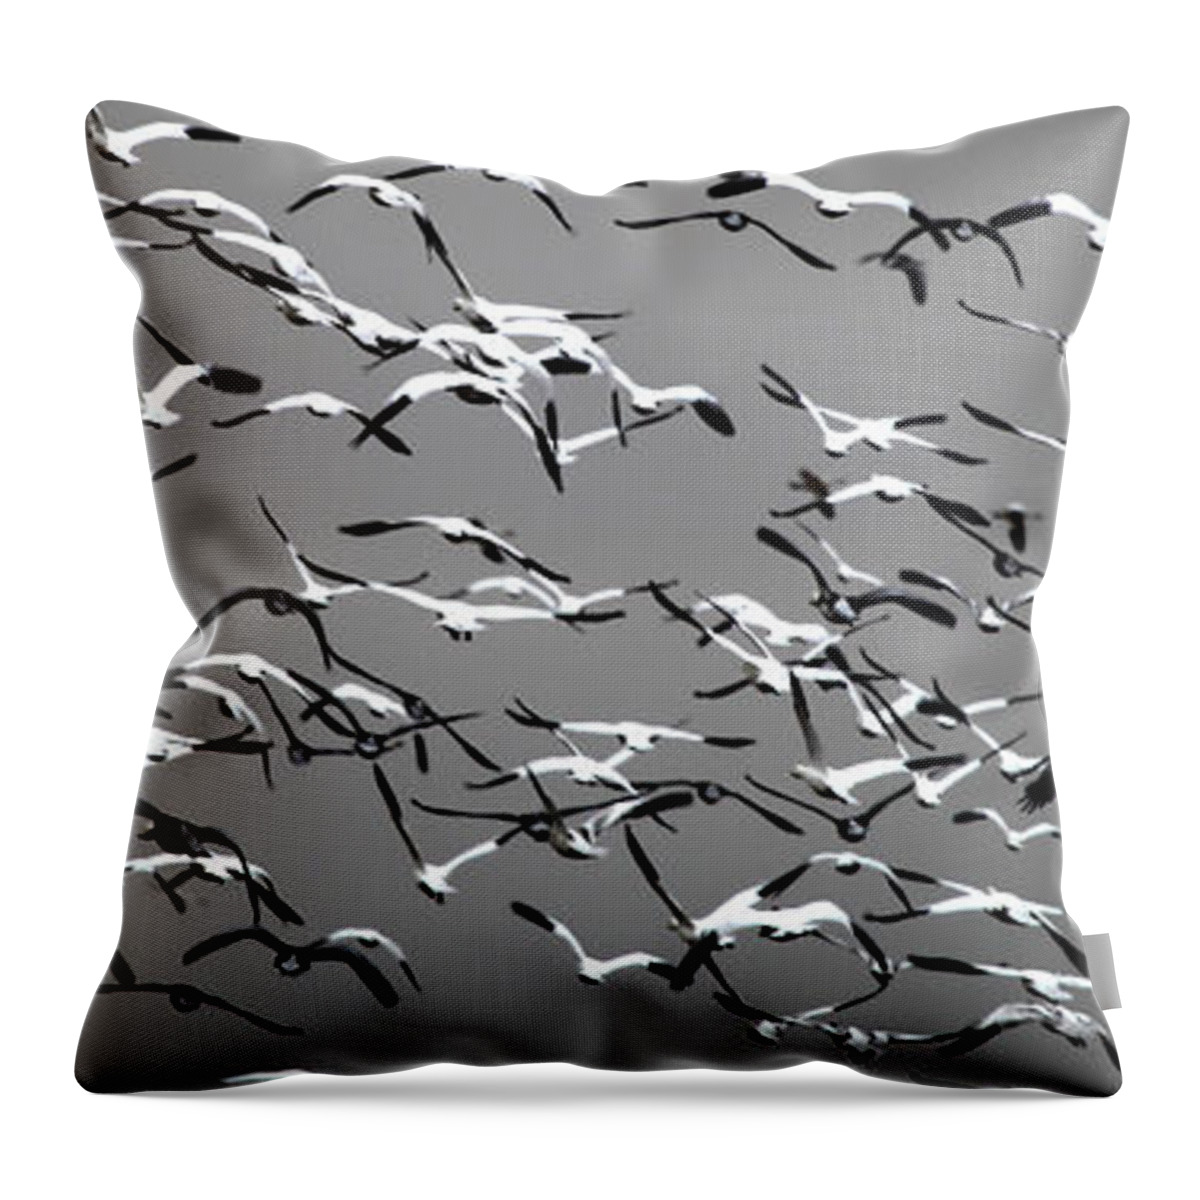  Throw Pillow featuring the photograph Take Wing 2 by Darcy Dietrich